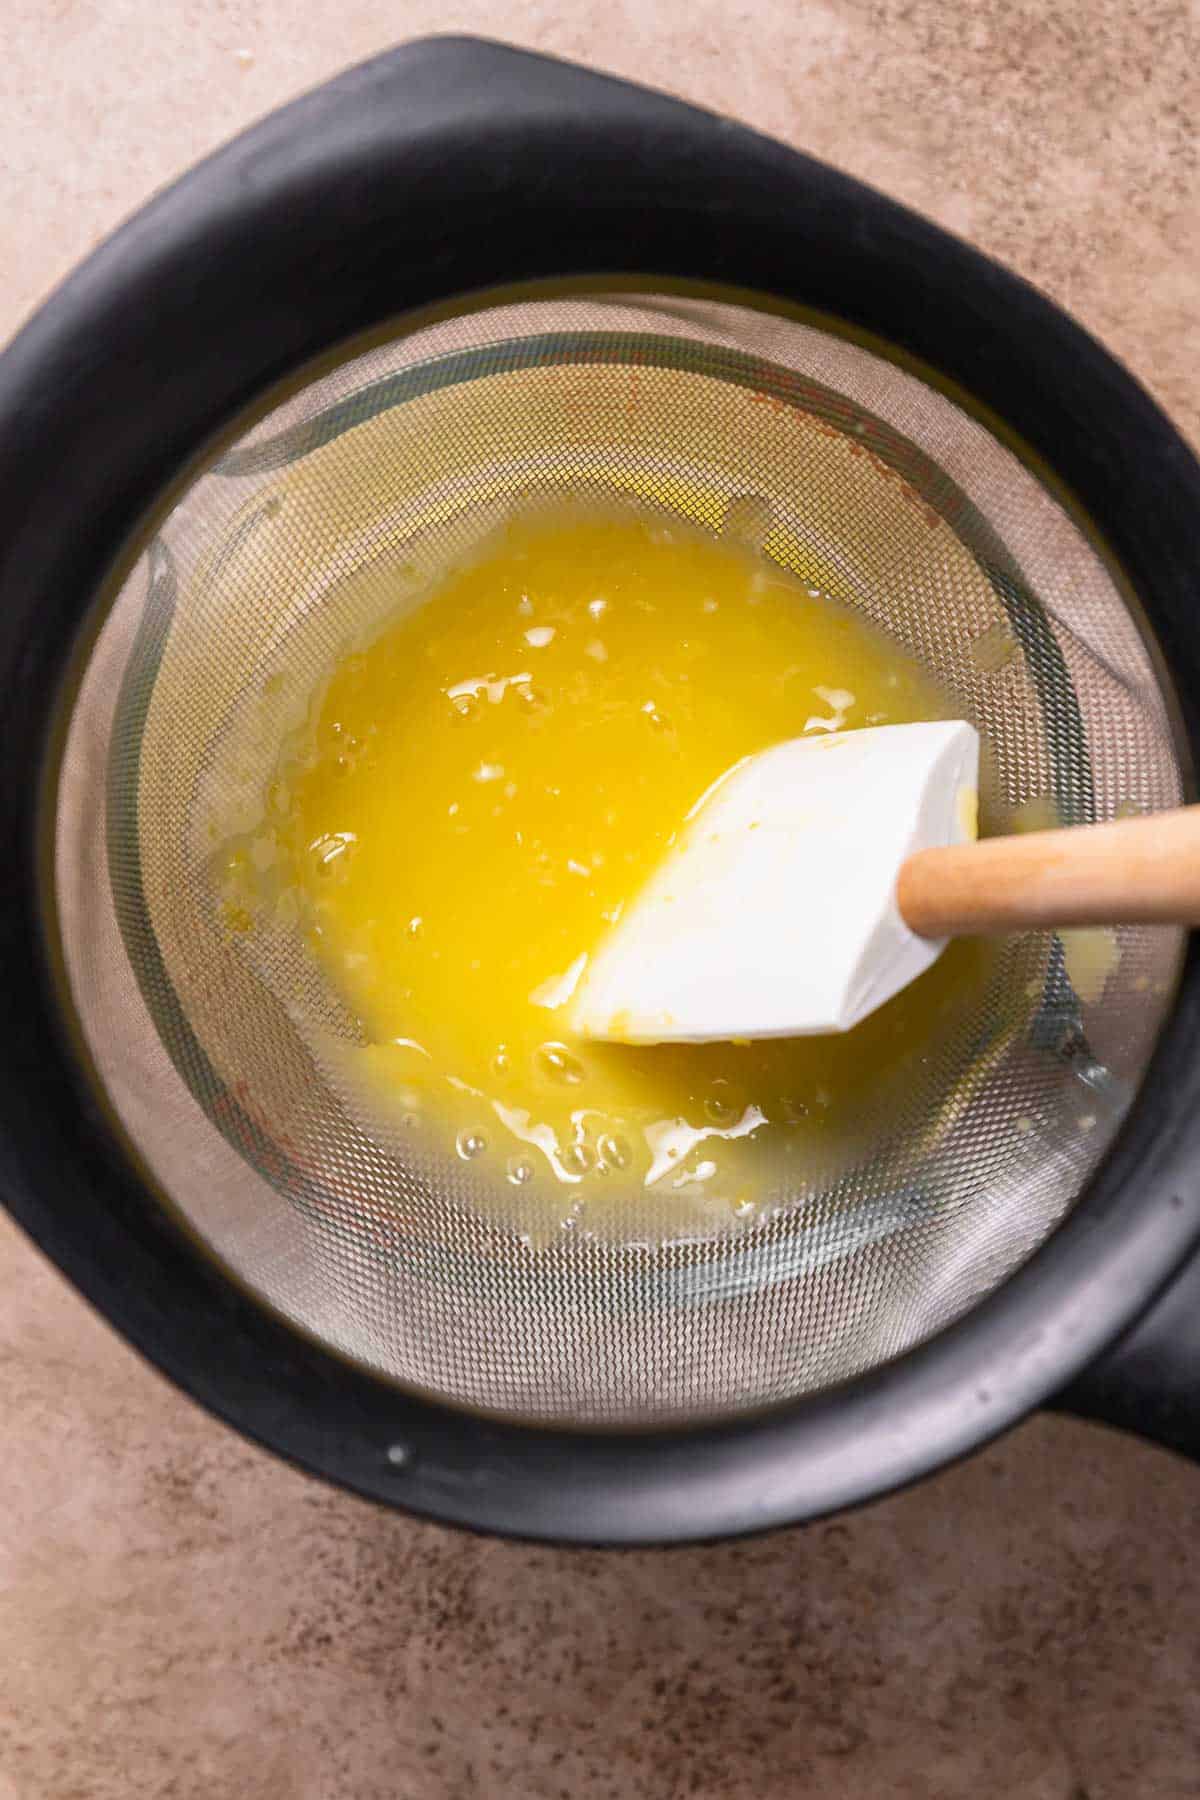 Lemon curd being pushed through a fine mesh strainer.